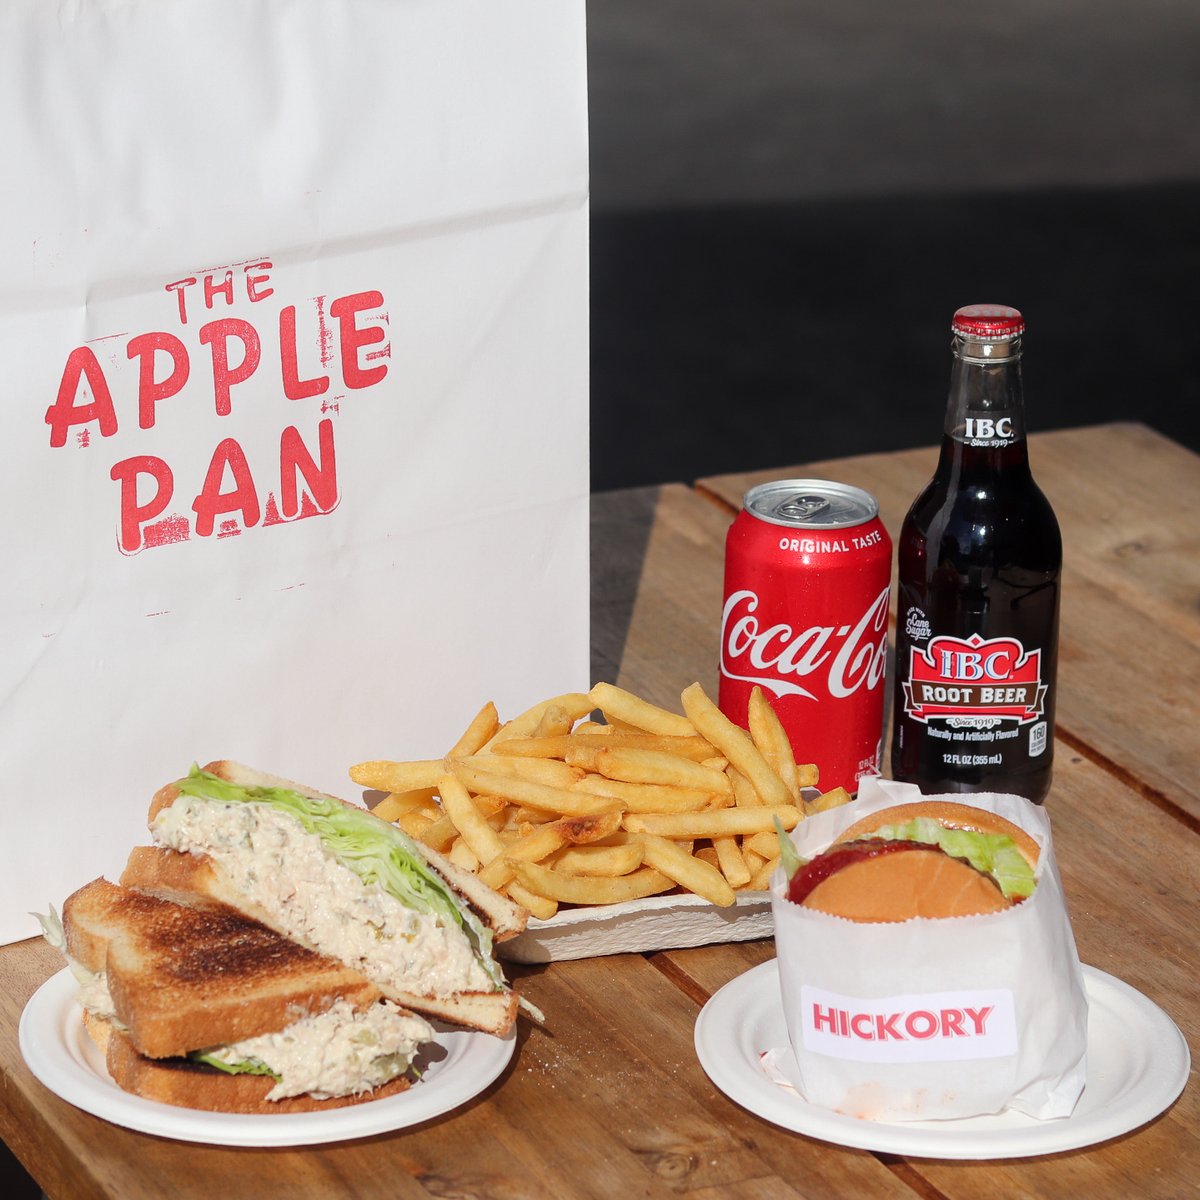 Red, white, and…burgers? Up your 4th of July BBQ game with our tasty classics! We’ll be open on Sunday for our usual business hours 11am-9pm! 🍎 #applepan #4thofjuly #burgers #hickoryburgers #bbq #applepie #icecream #fries #tunasandwich #LA #classic #summer